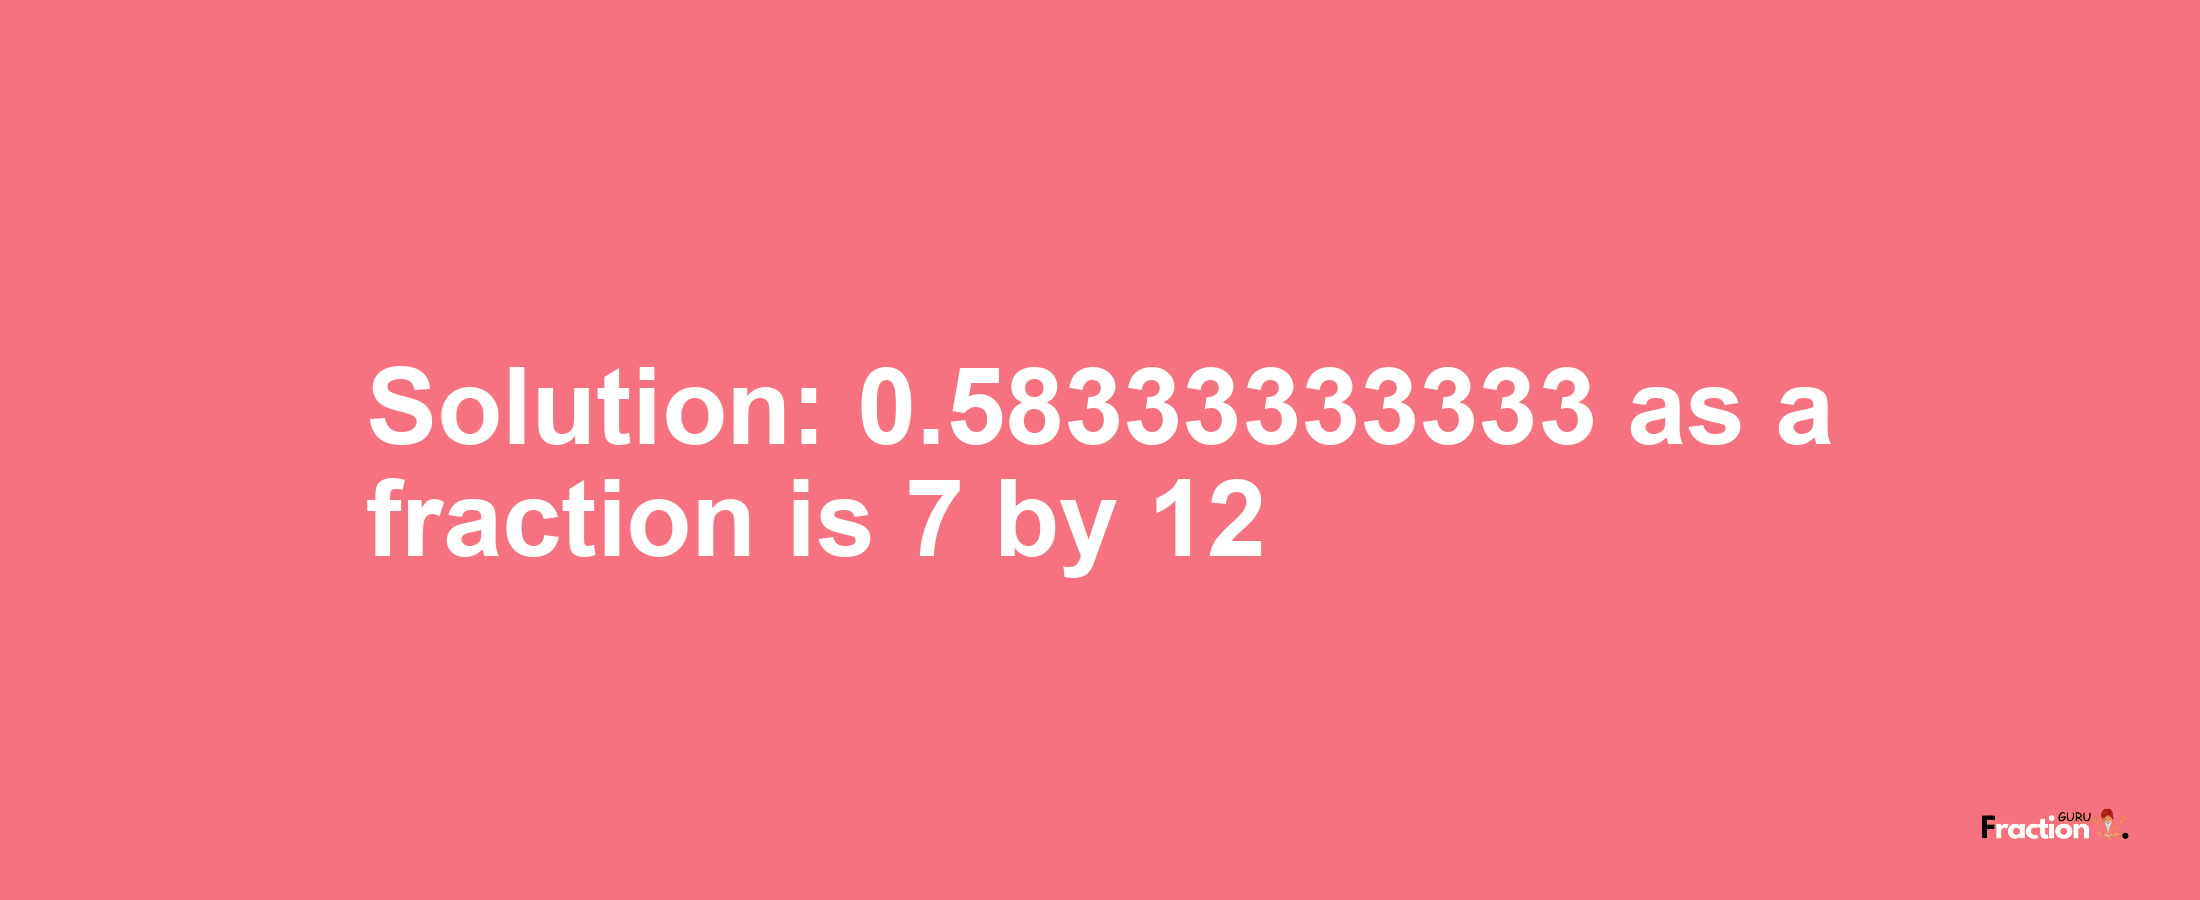 Solution:0.58333333333 as a fraction is 7/12